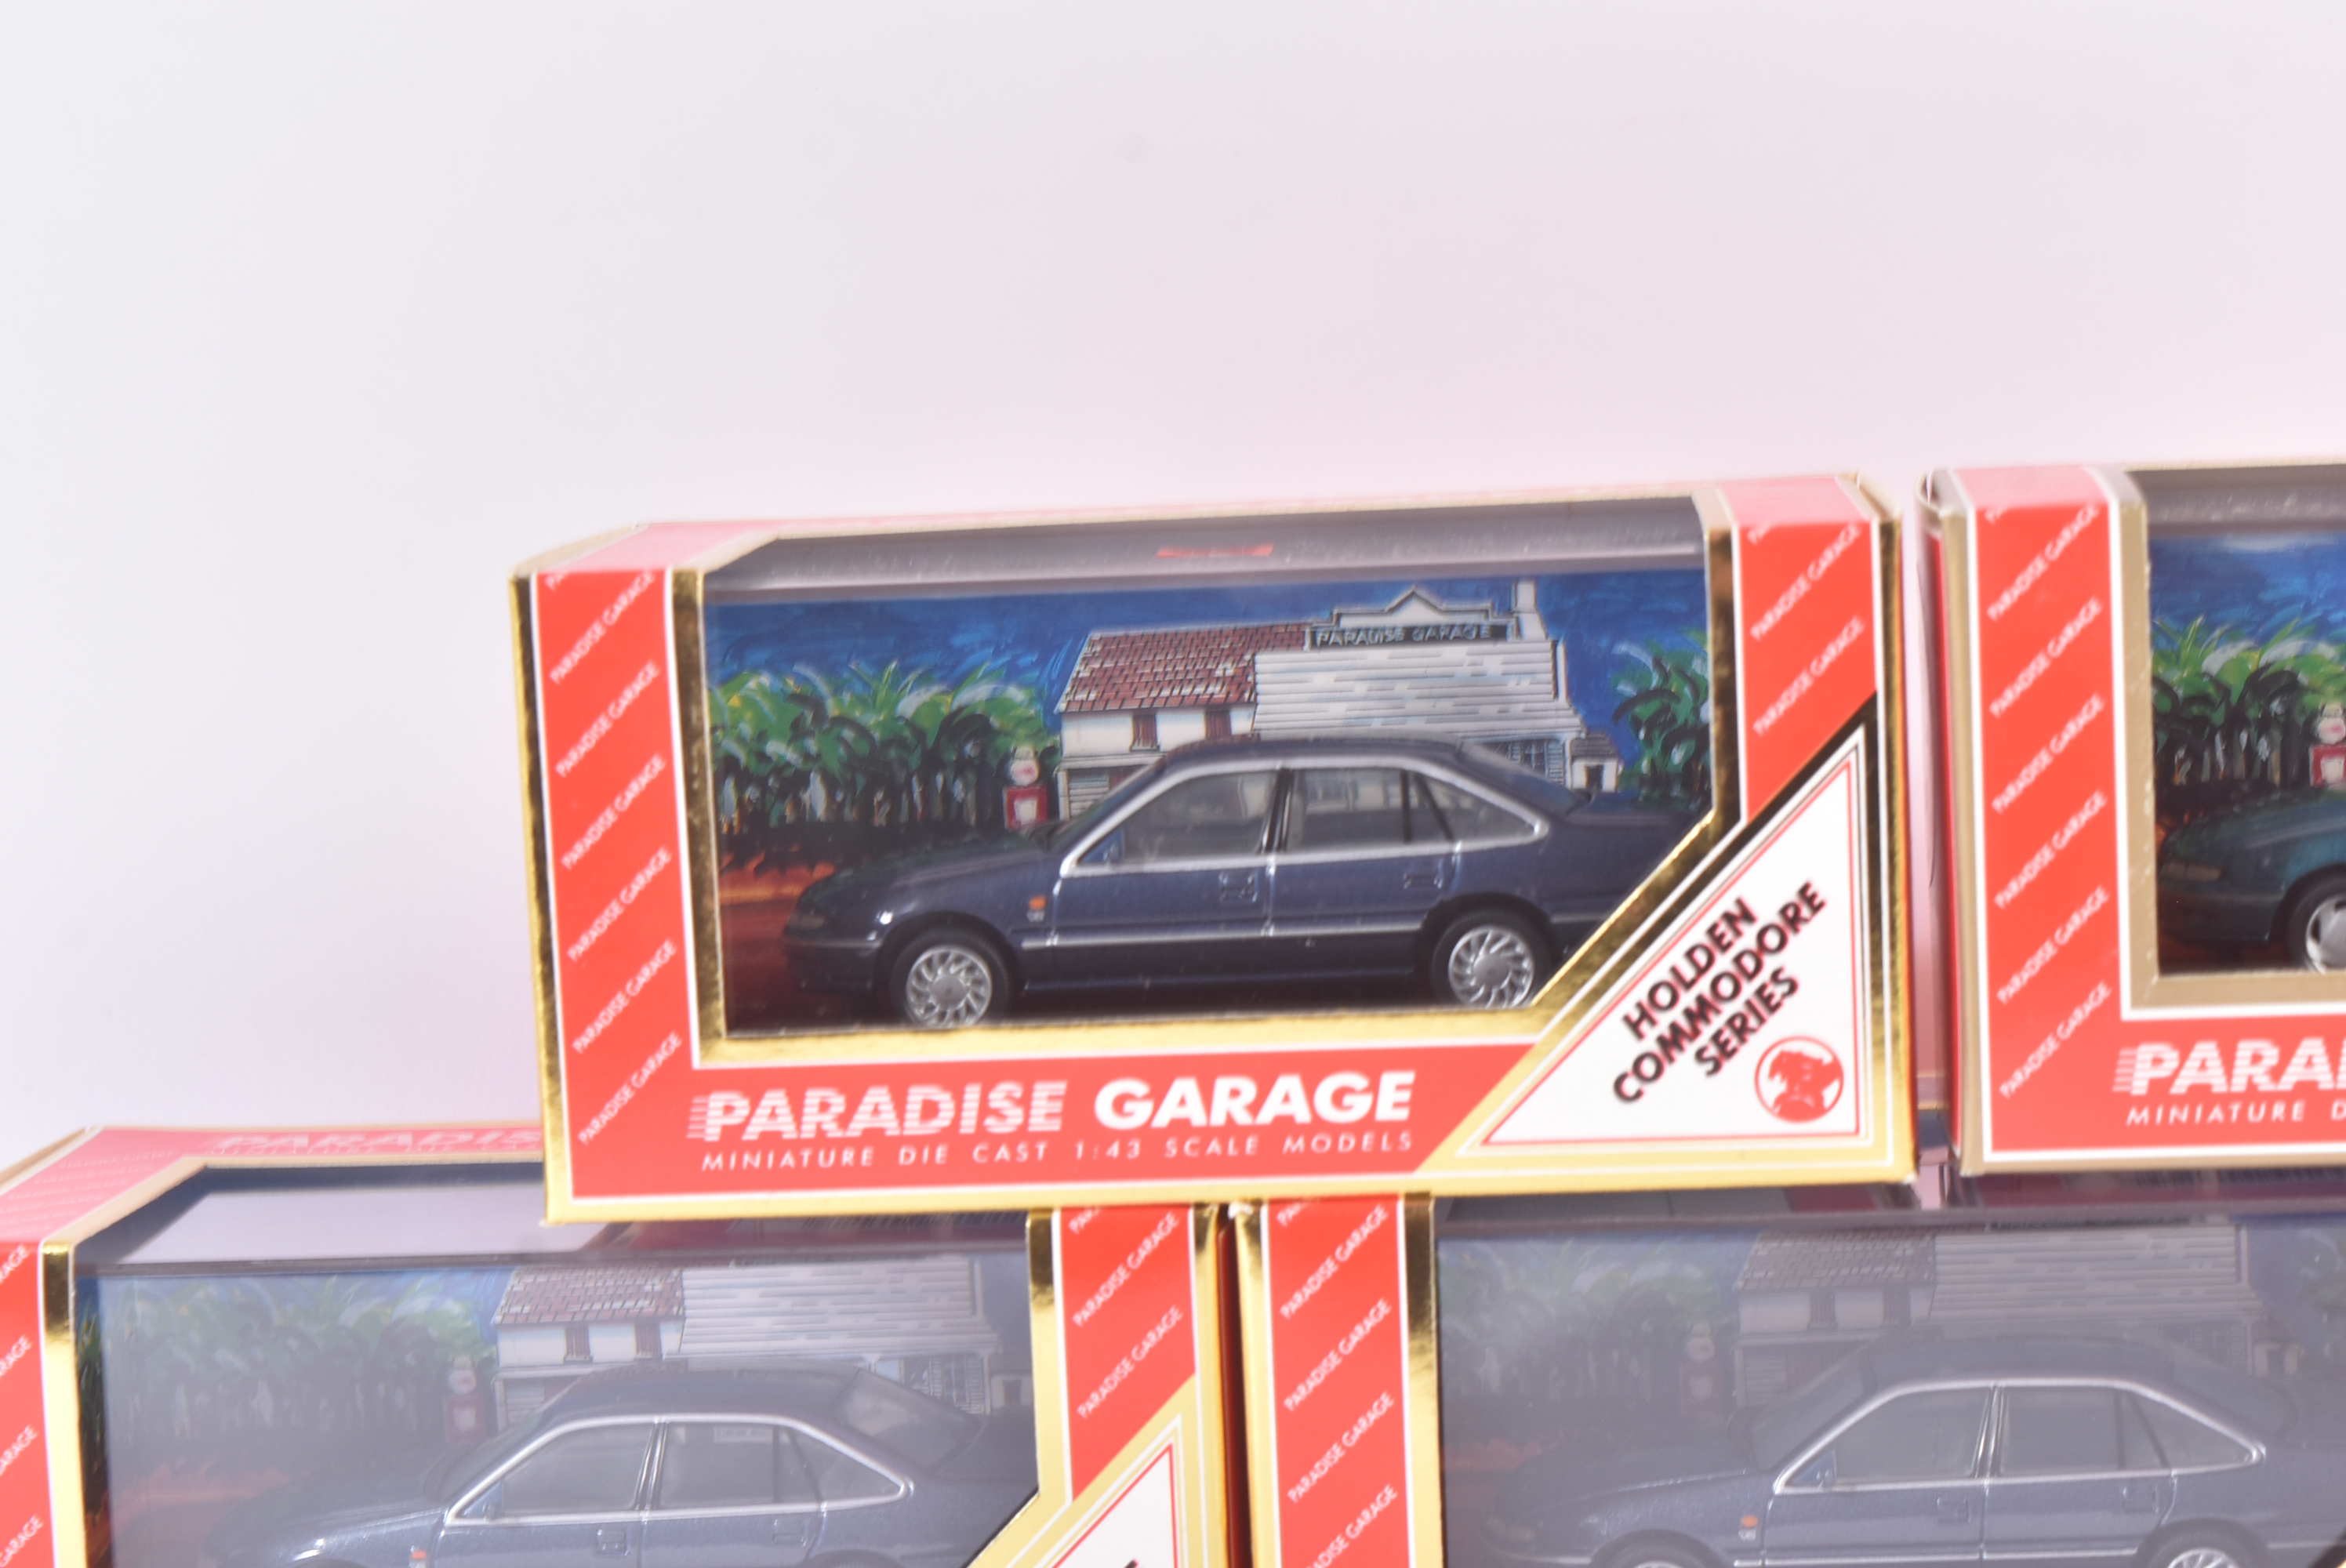 PARADISE GARAGE - 1/43 SCALE PRECISION DIECAST MODELS - Image 6 of 6